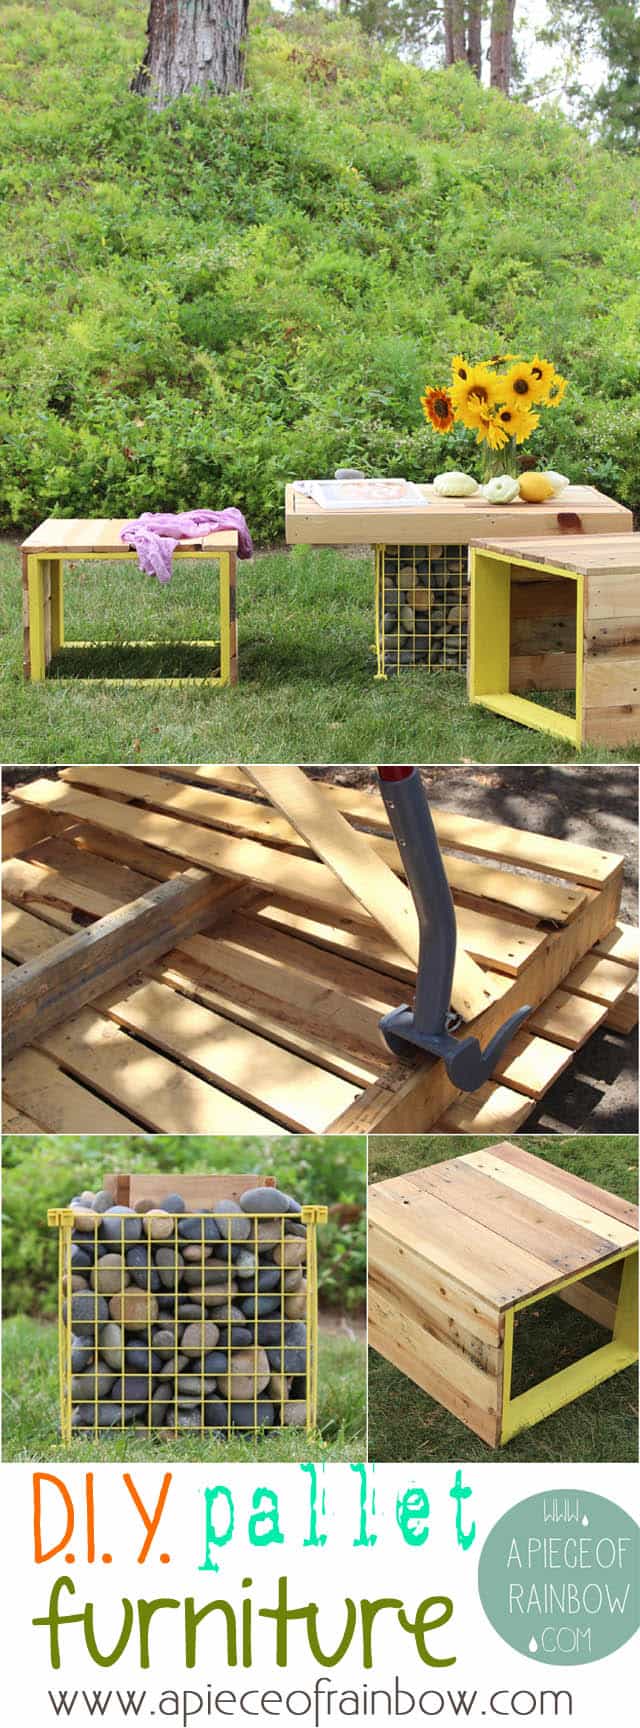 make pallet garden furniture: benches and gabion table - www.apieceofrainbow.com